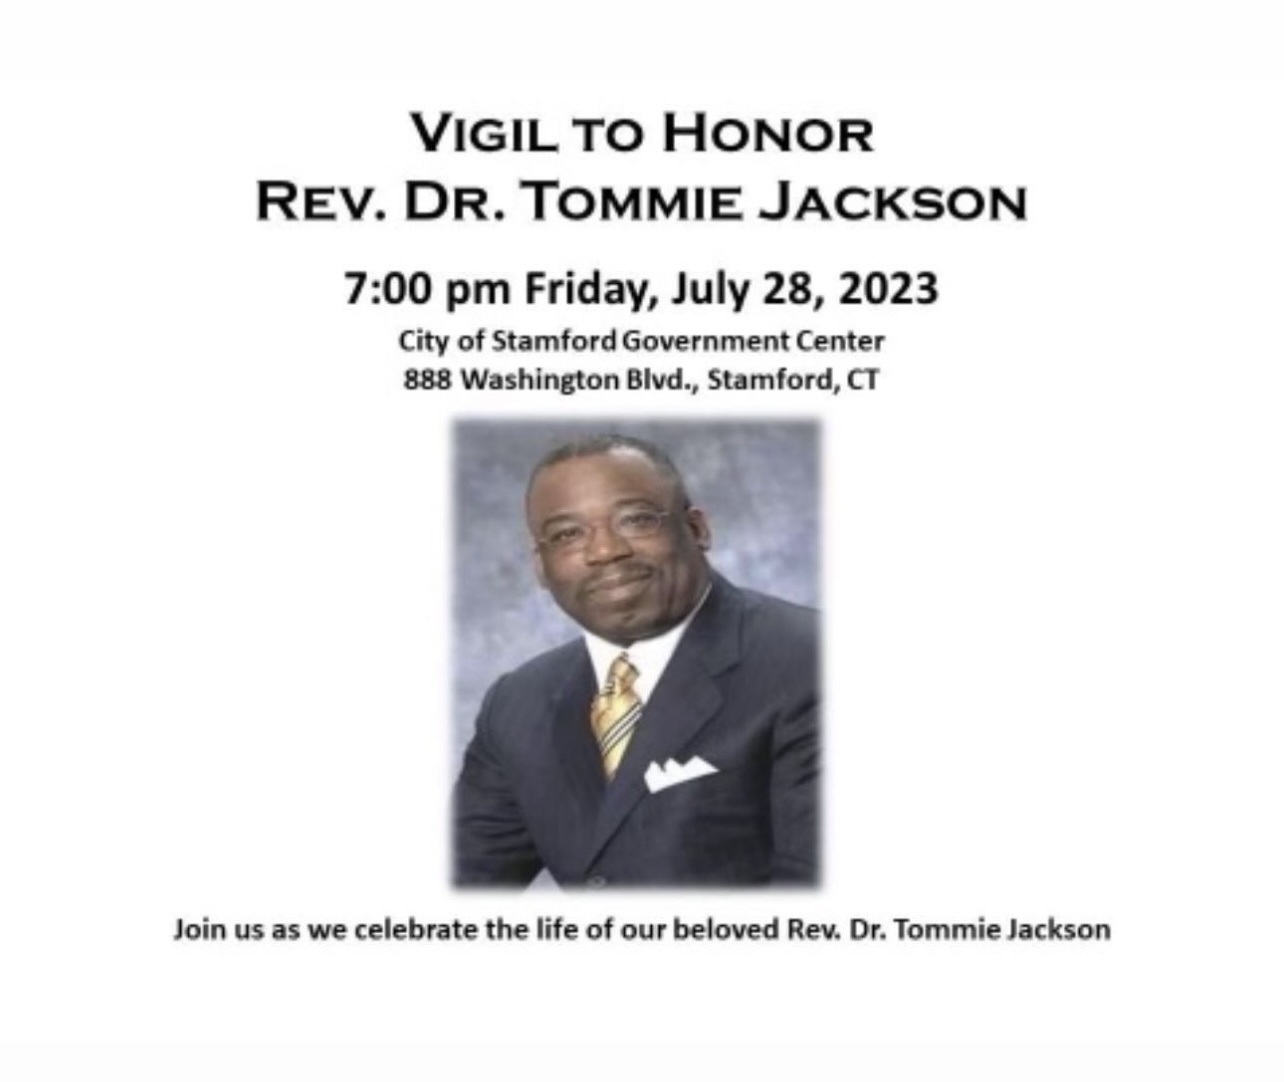 Please consider attending a vigil to honor the memory and legacy of Reverand Tommie Jackson, planned for July 28 at 7 p.m., Stamford Government Center